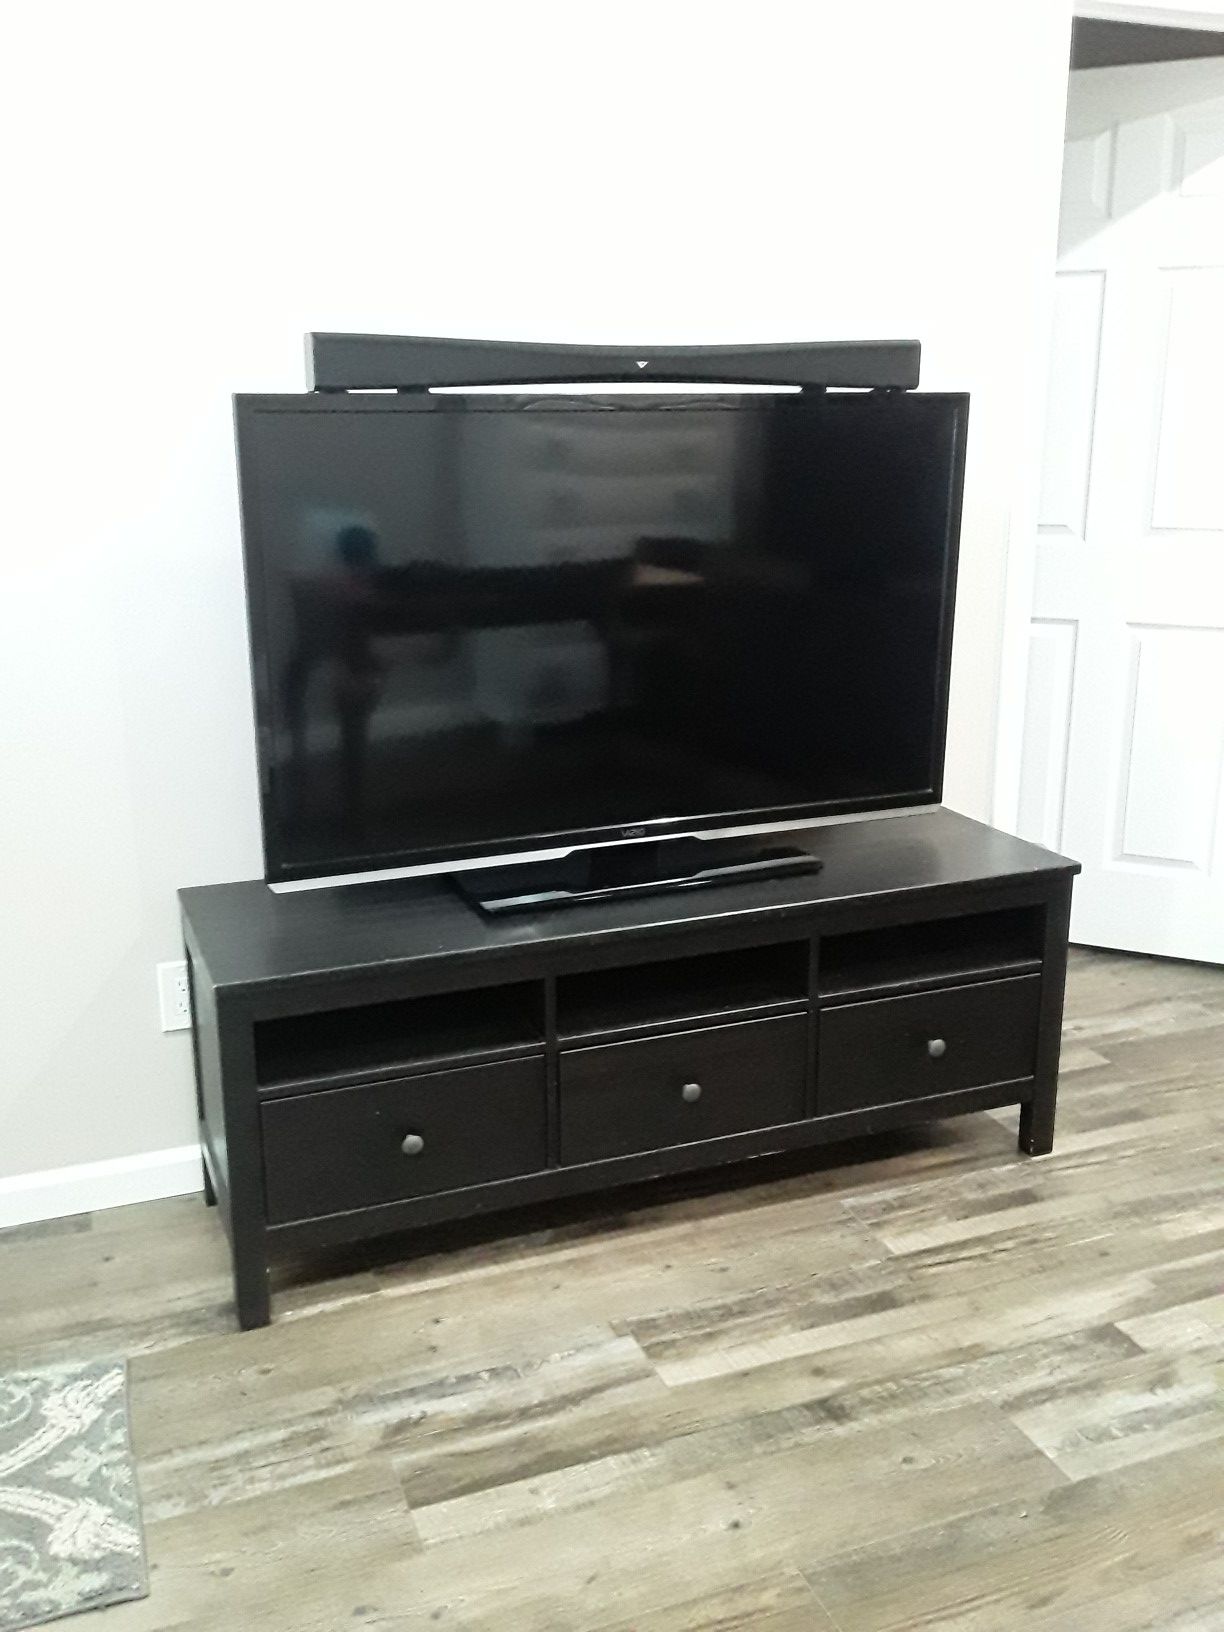 TV stand only hemnes from IKEA $75